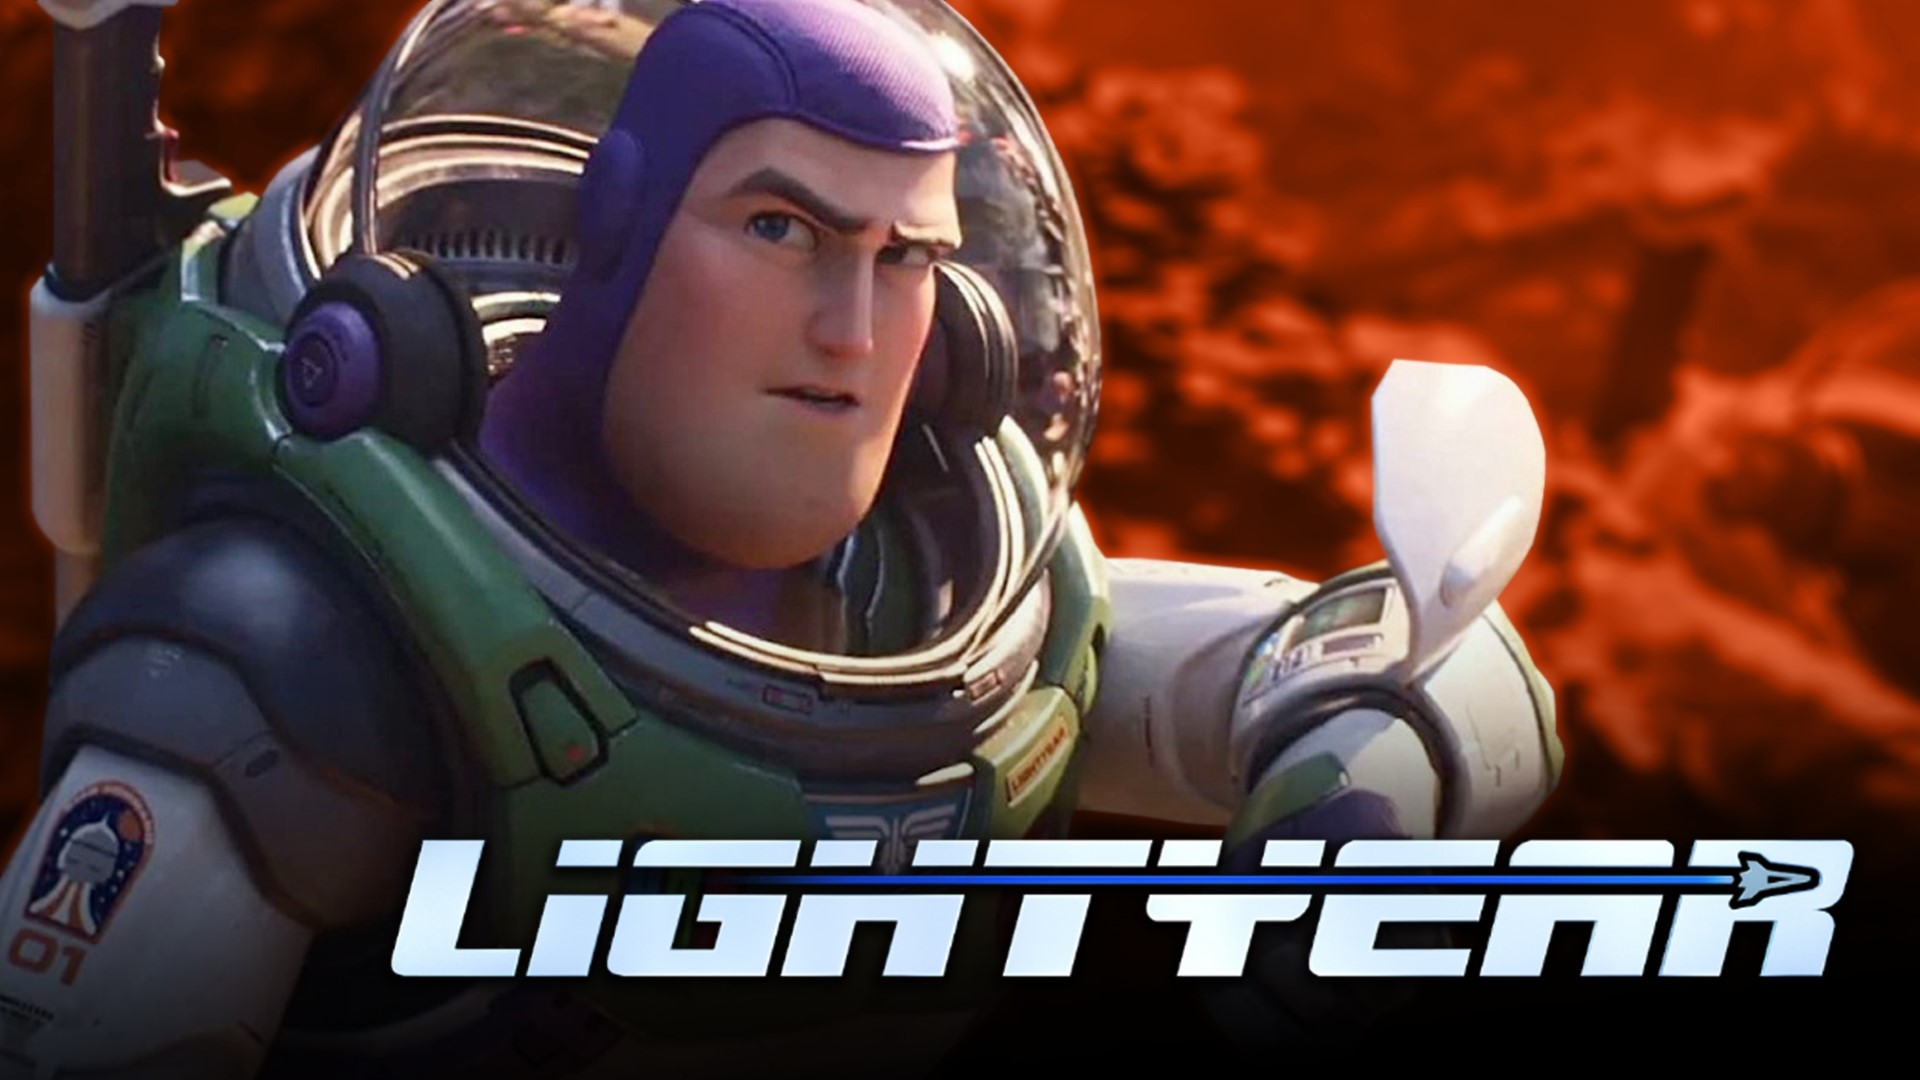 You've read all the headlines that Lightyear failed at the box office, but does the movie any buzz and is it worth watching? Listen to our review!